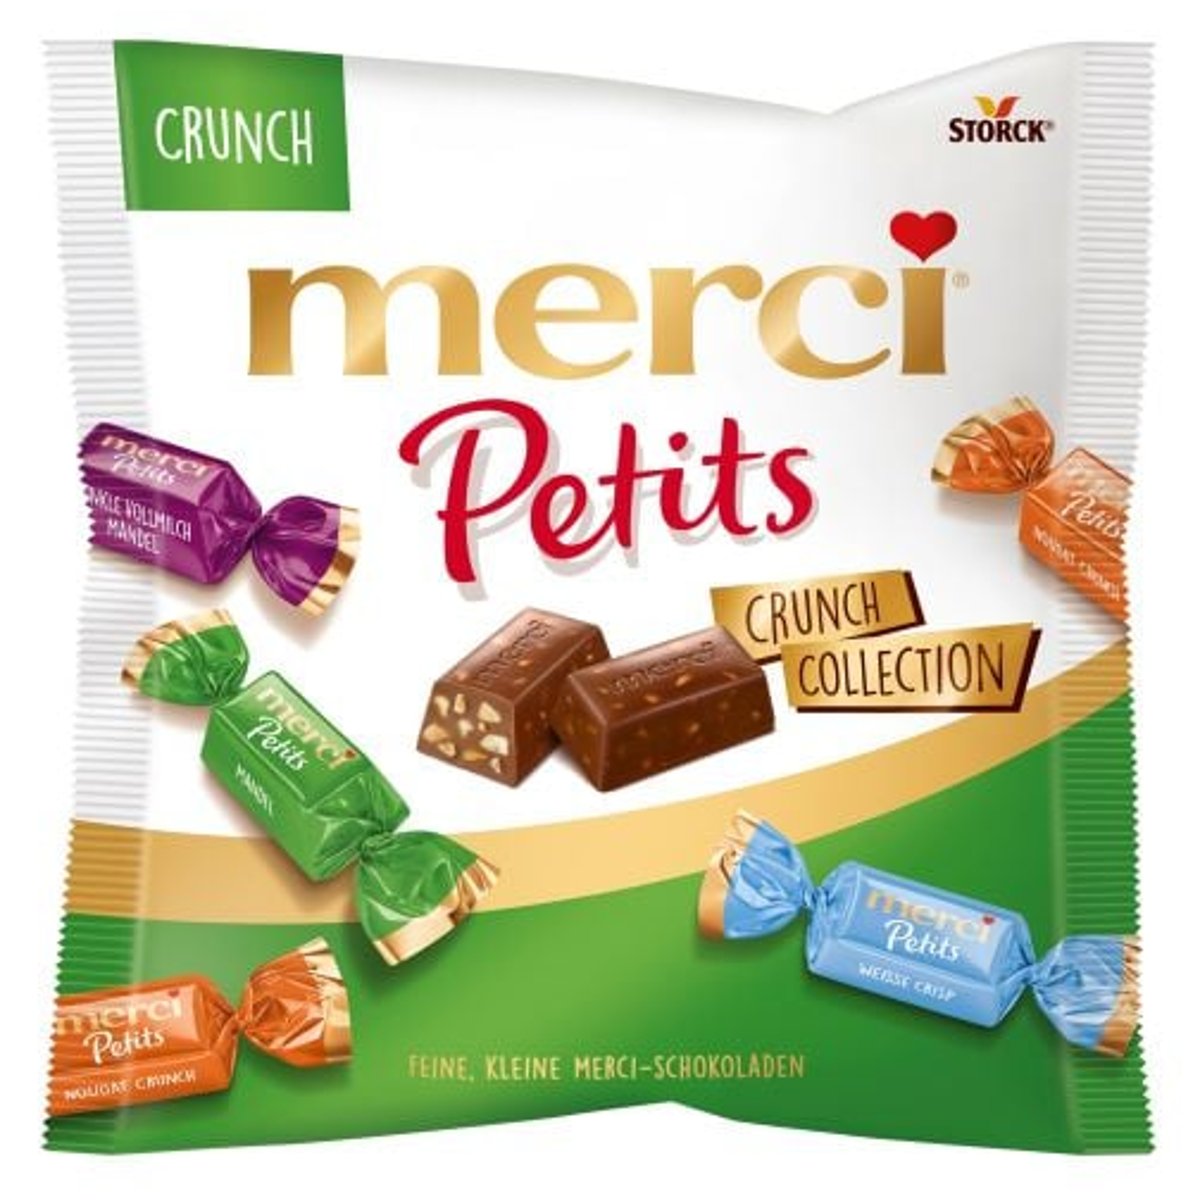 Merci Petits Crunch collection